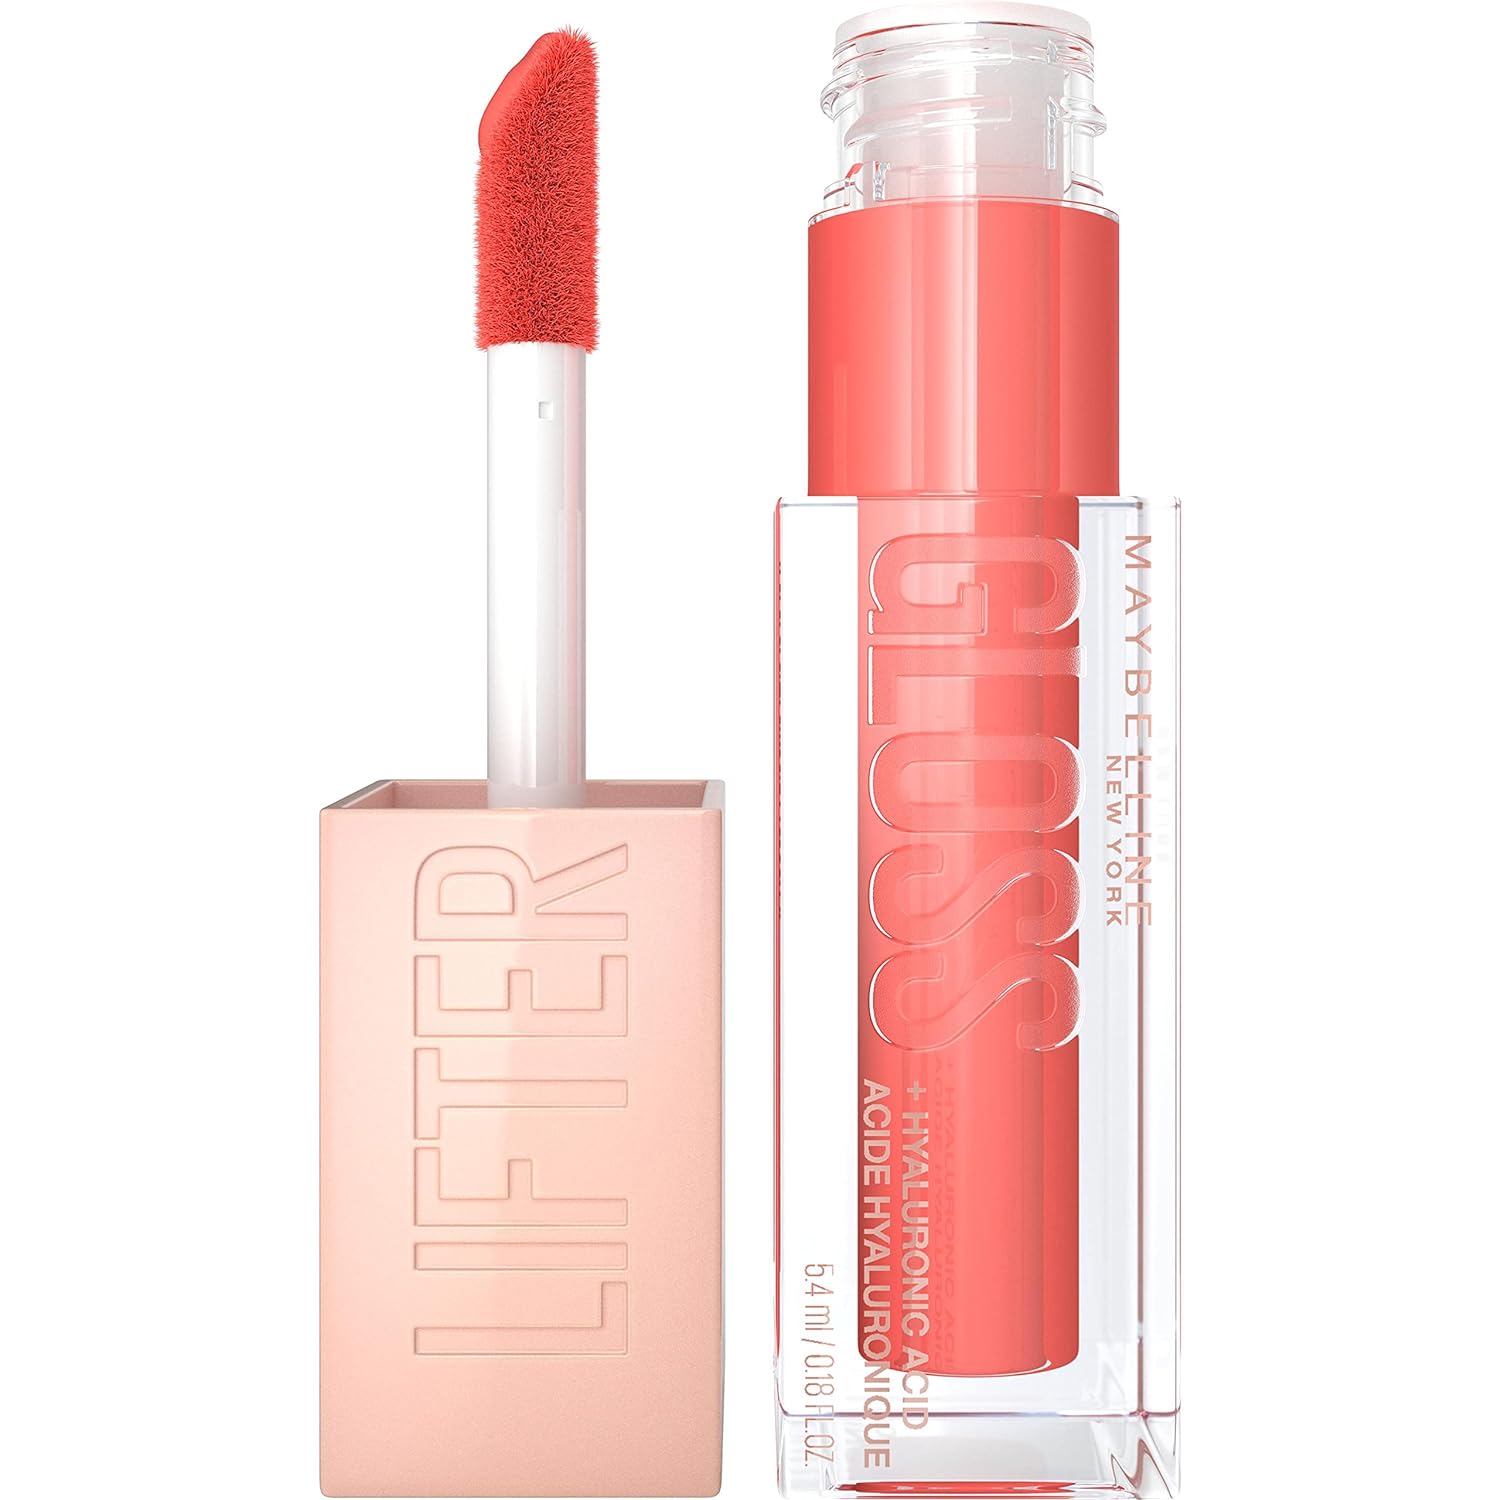 Maybelline New York Shiny Lip Gloss for Full-Like Lips, Moisturising, with Hyaluronic Acid, LIFTER GLOSS CANDY Drop, Color: No. 022 Peach Ring (orange), 1 x 5.4 ml